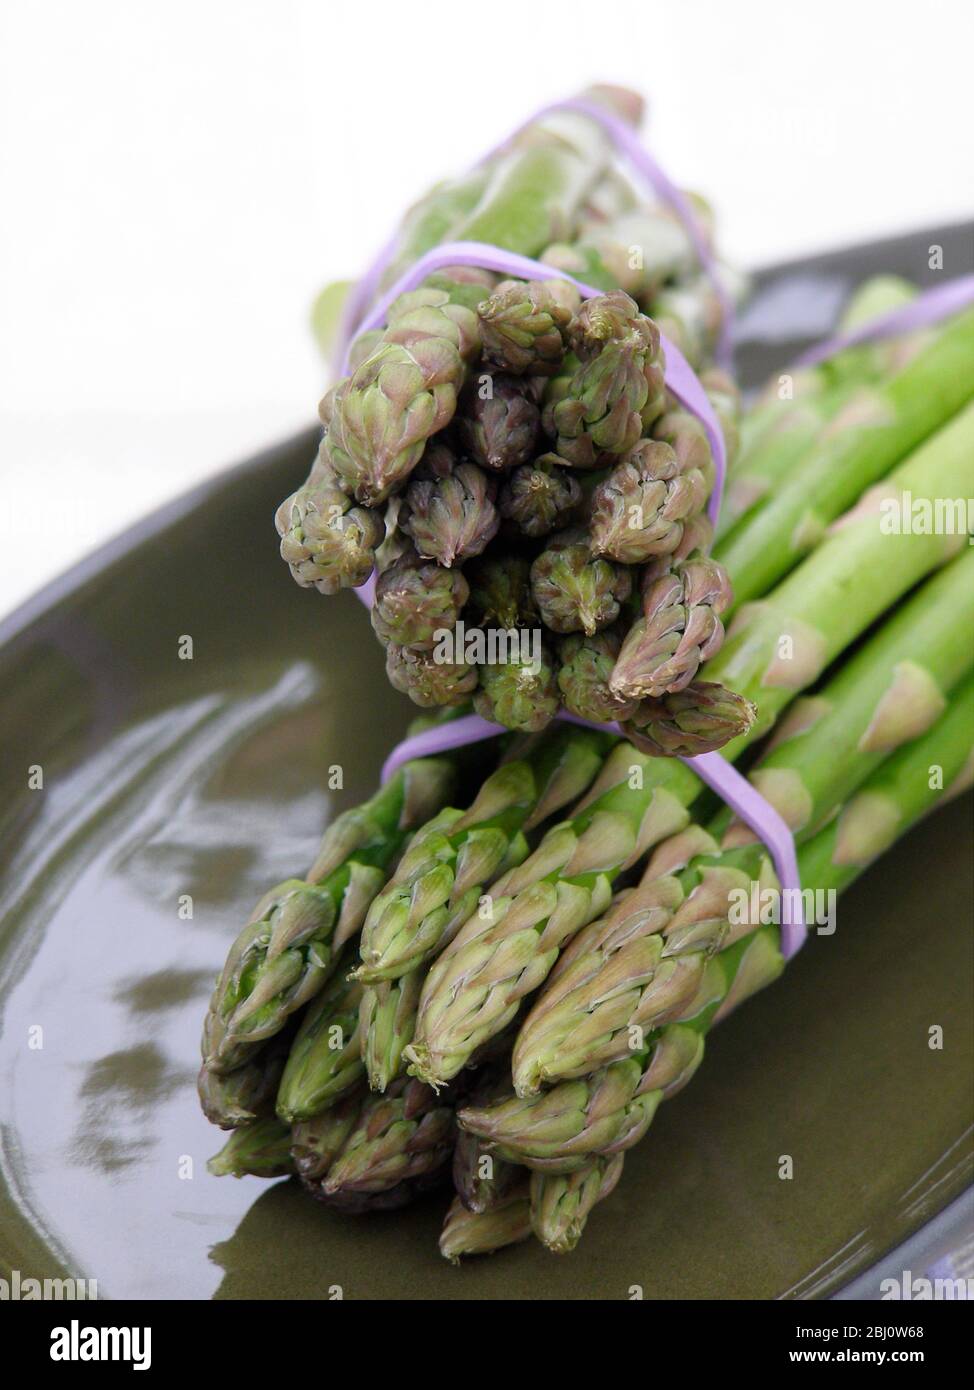 Two bunches of asparagus on green plate - Stock Photo